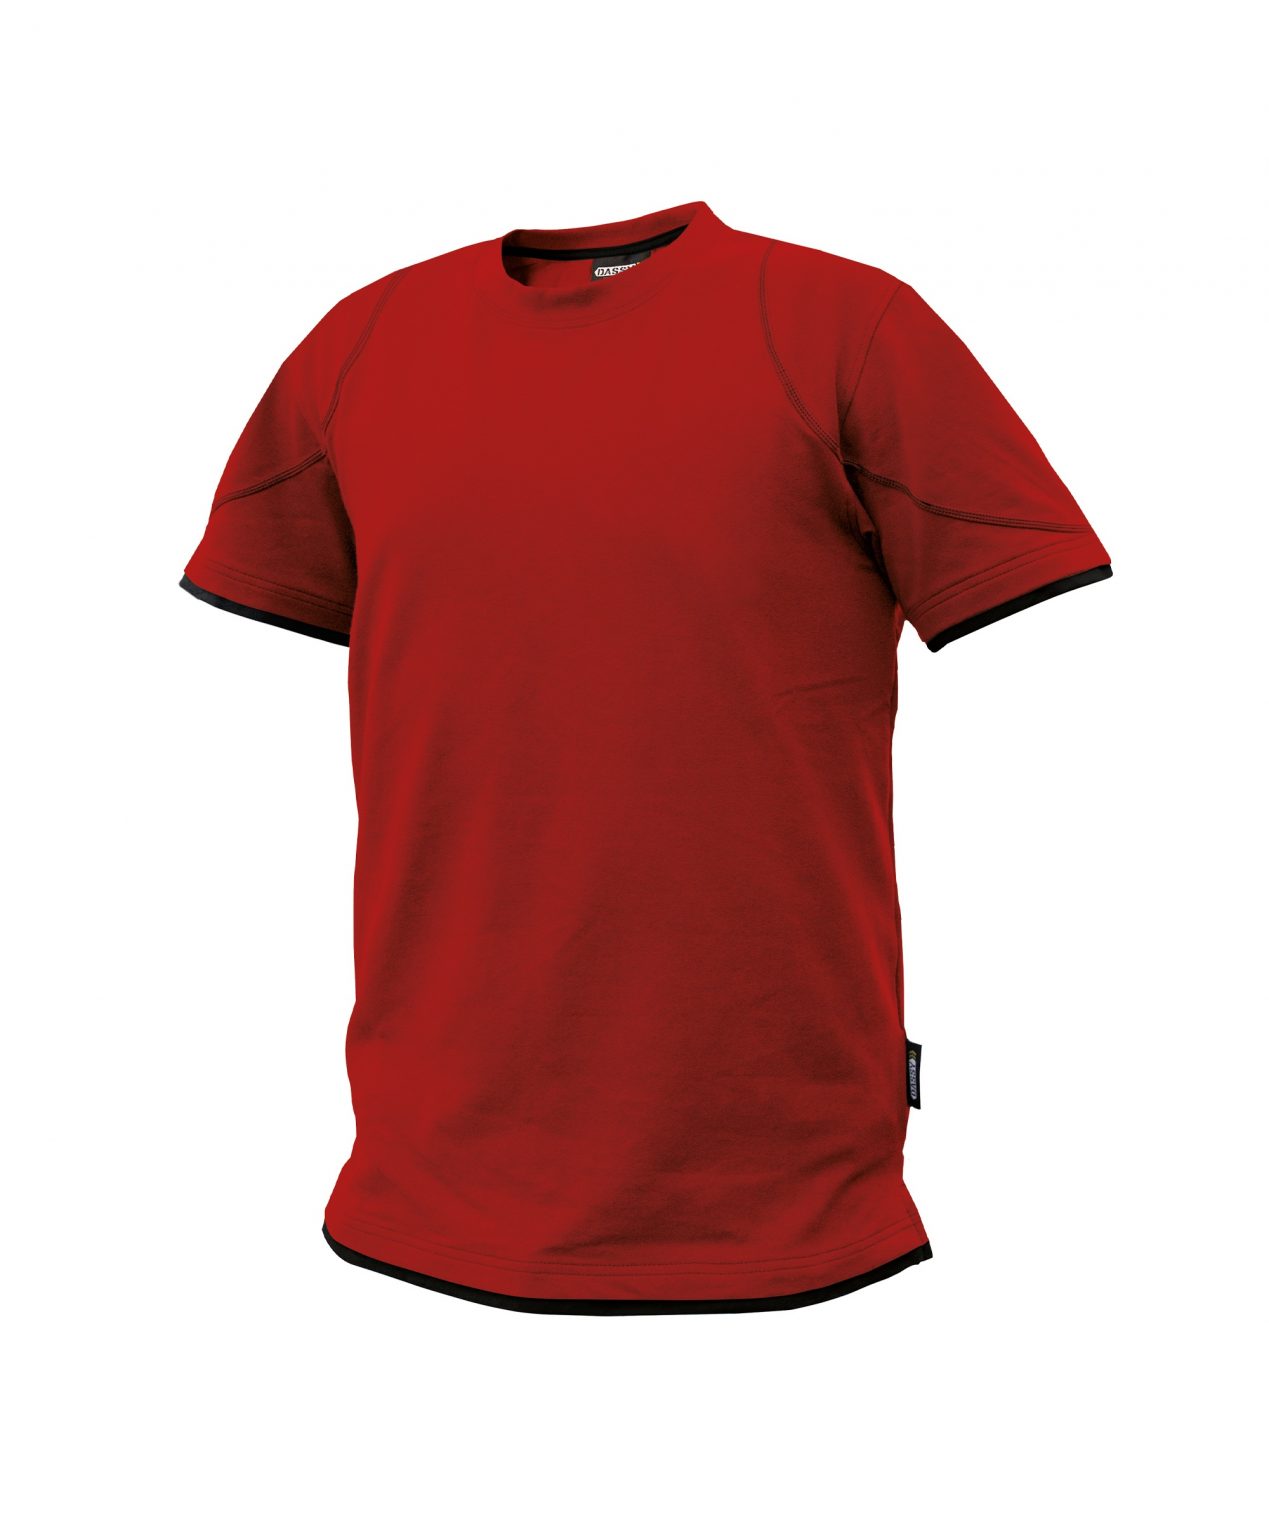 kinetic t shirt red black front